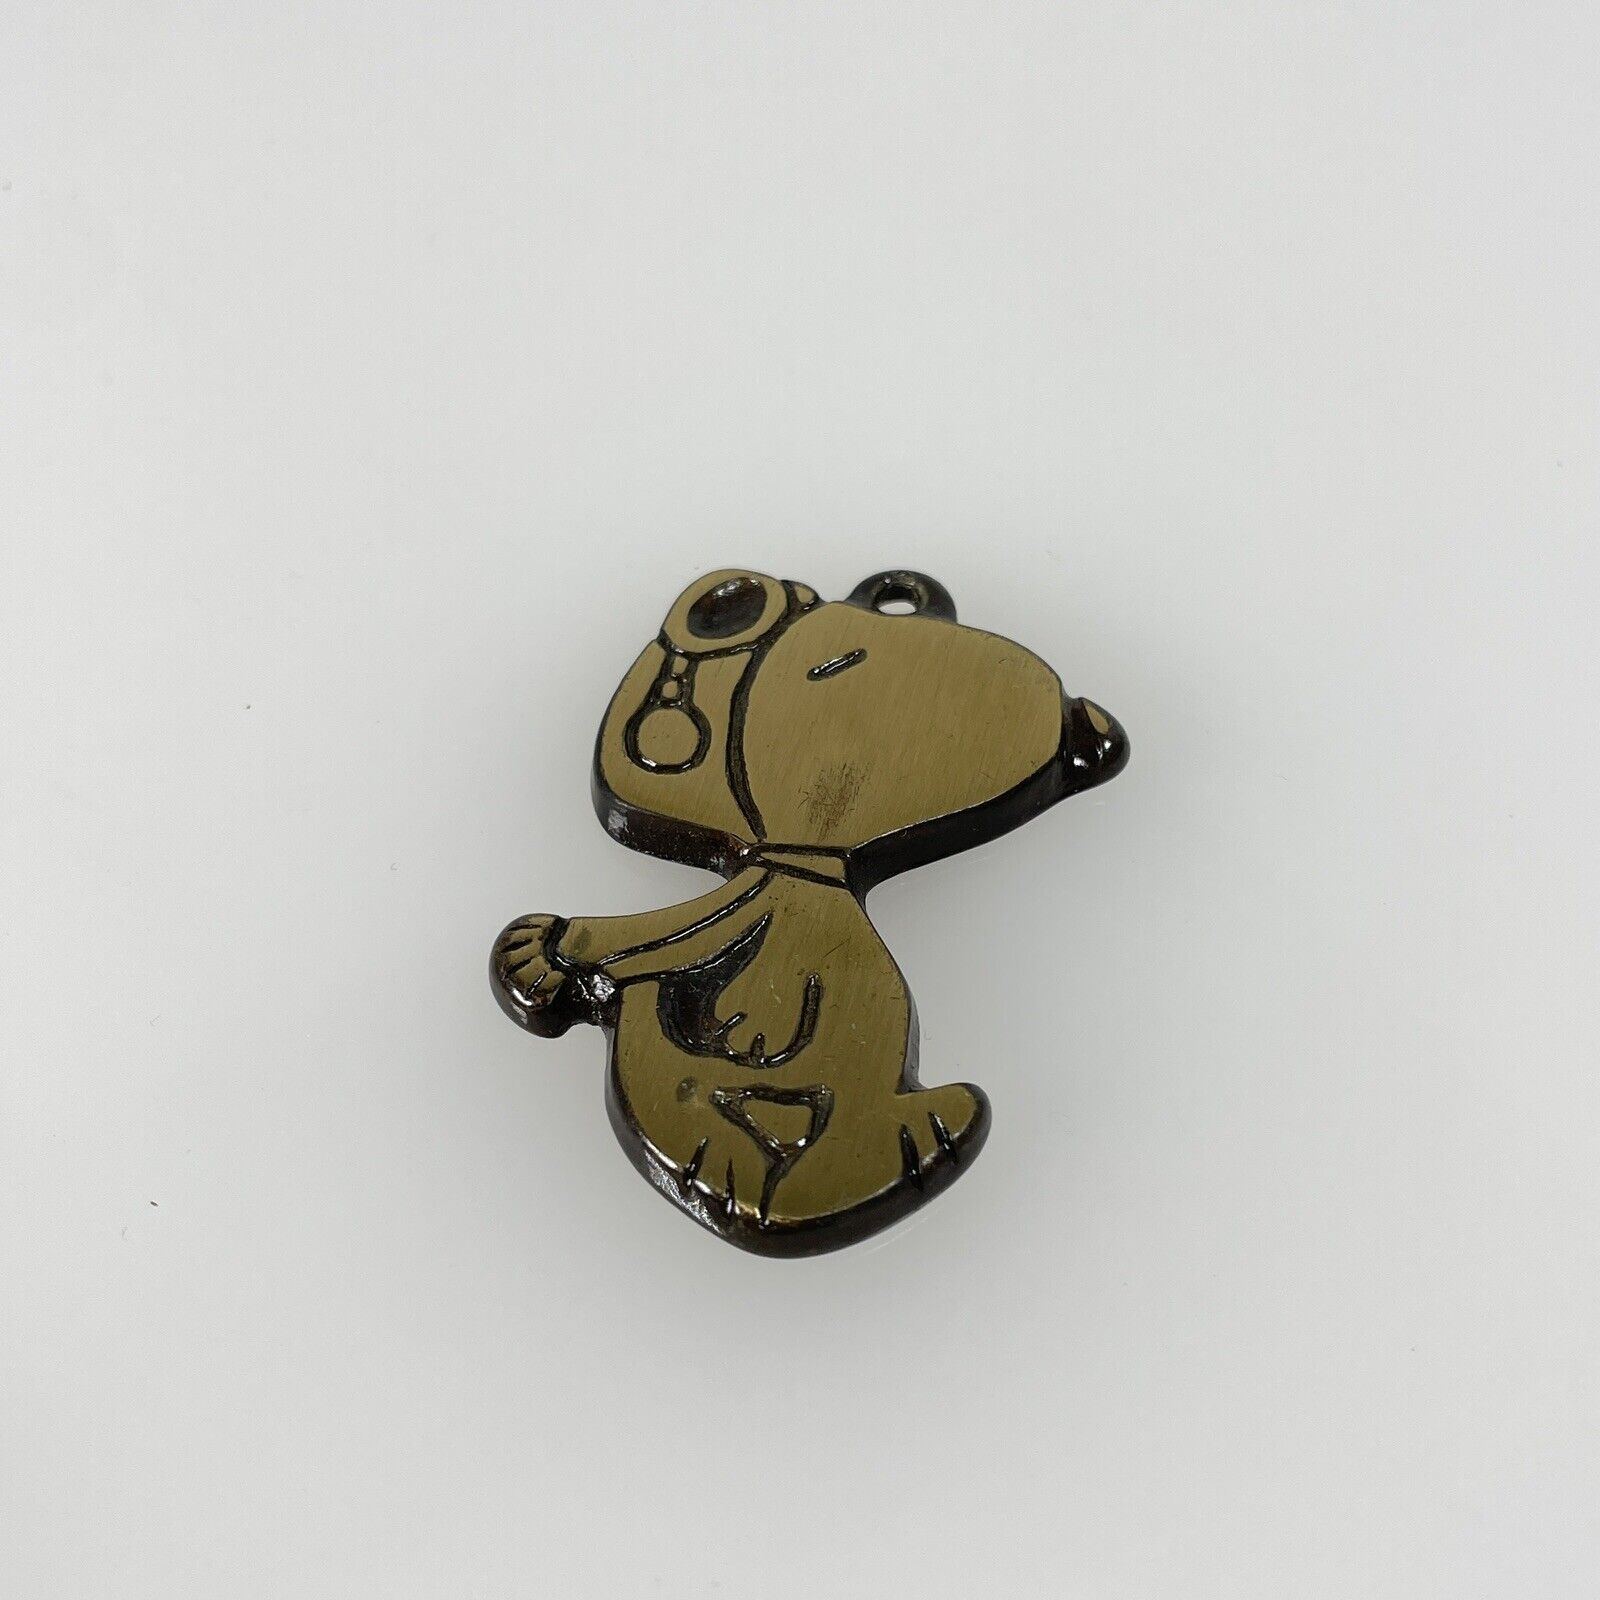 Vintage 1965 Solid Brass Snoopy Key Fob, United Feature Syndicate Inc.